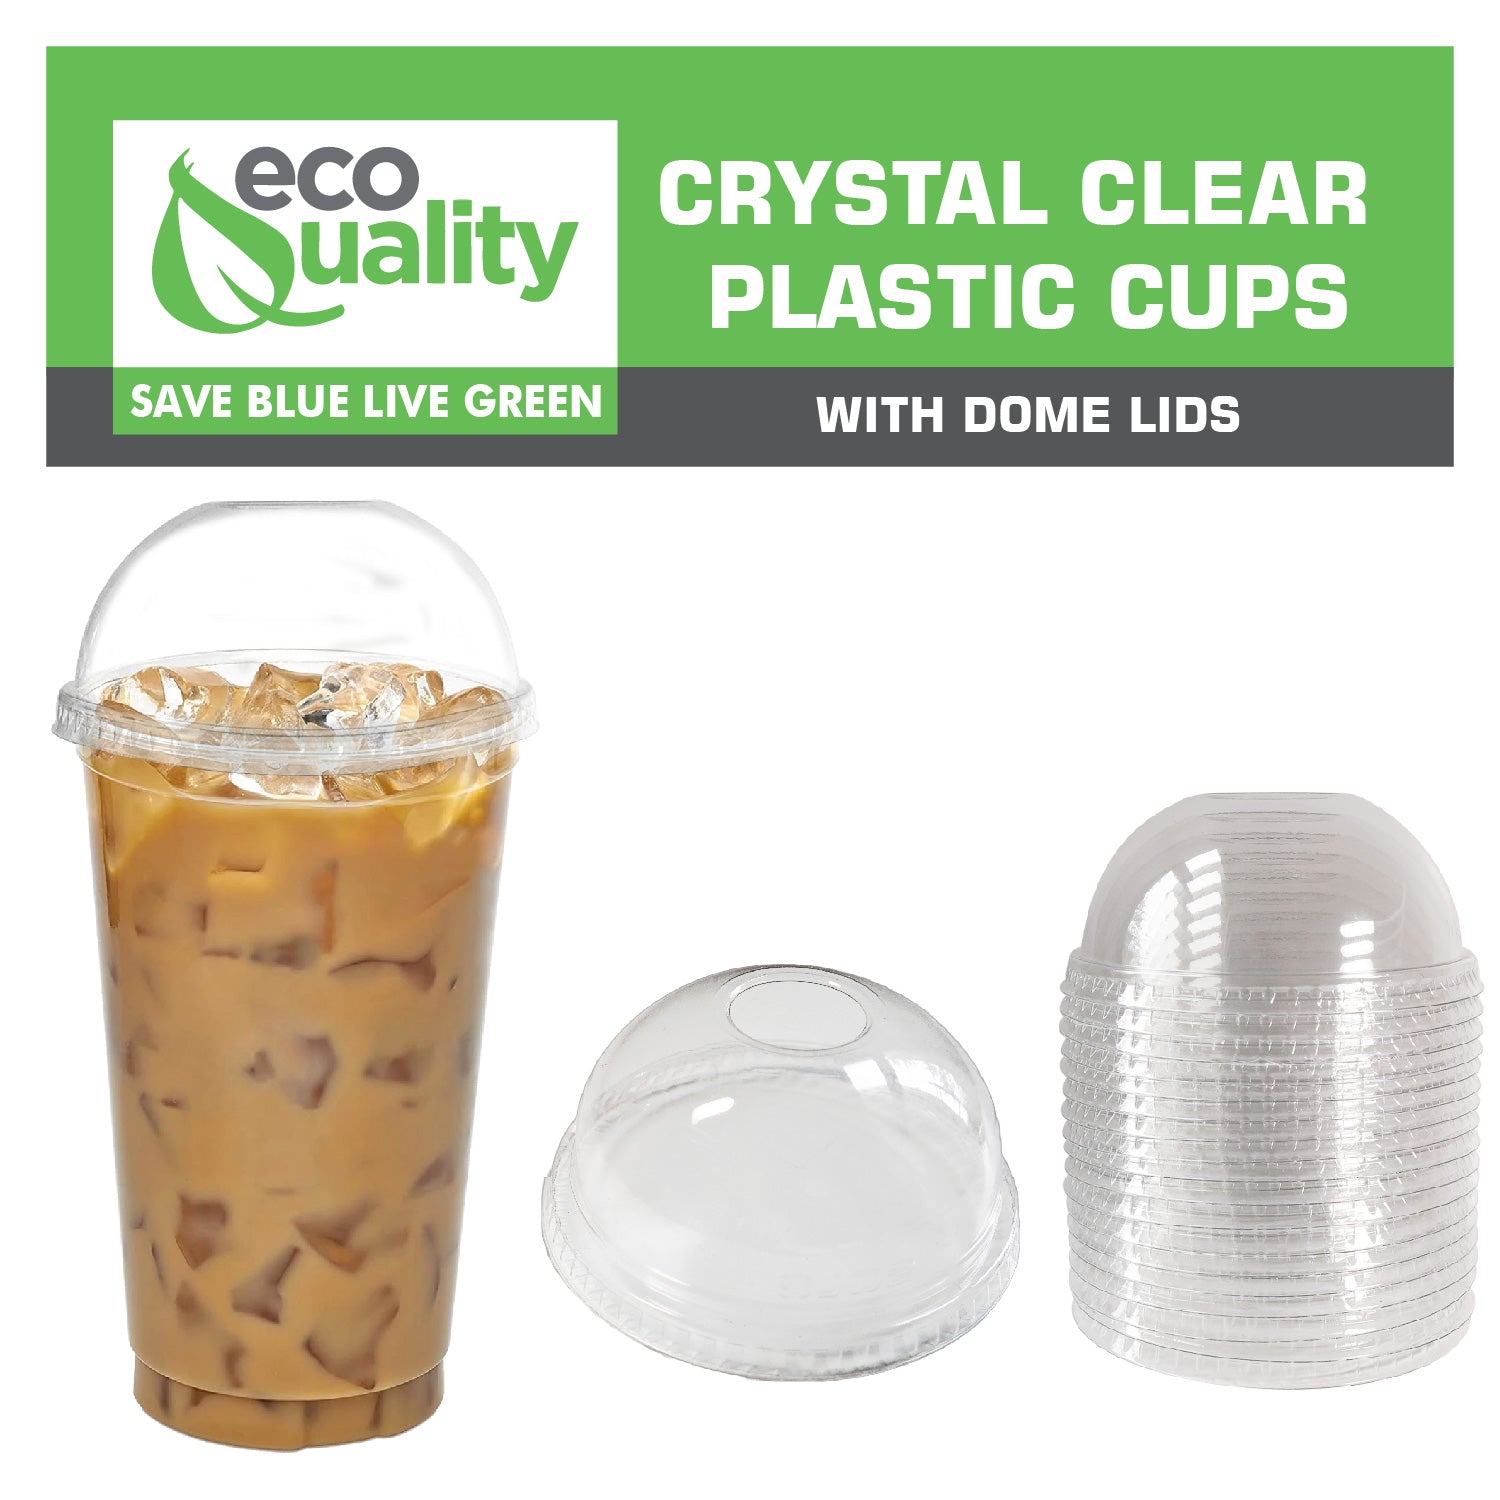 10oz Disposable Pet Clear Plastic Smoothie Cups with Clear Dome Lids